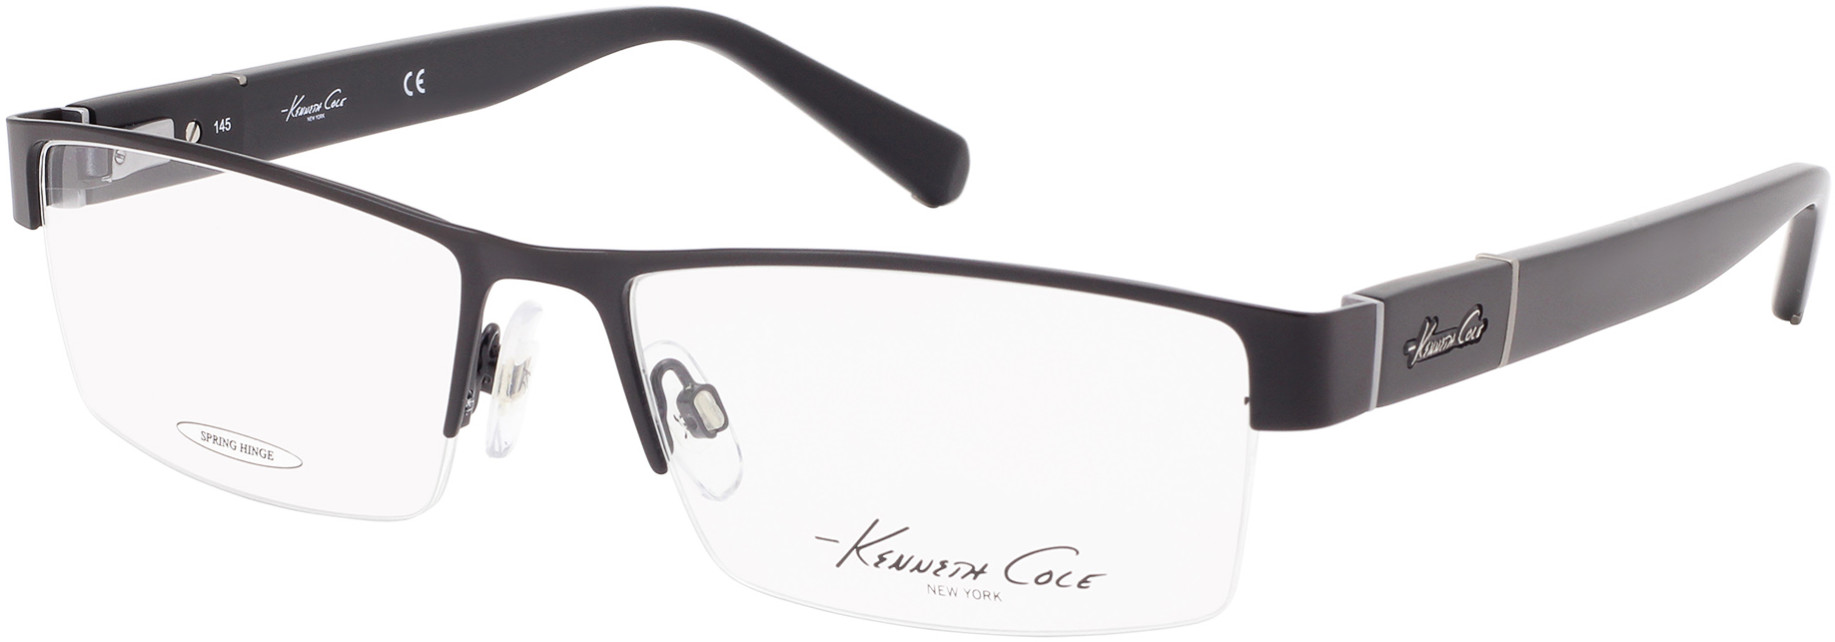 KENNETH COLE NY 0217